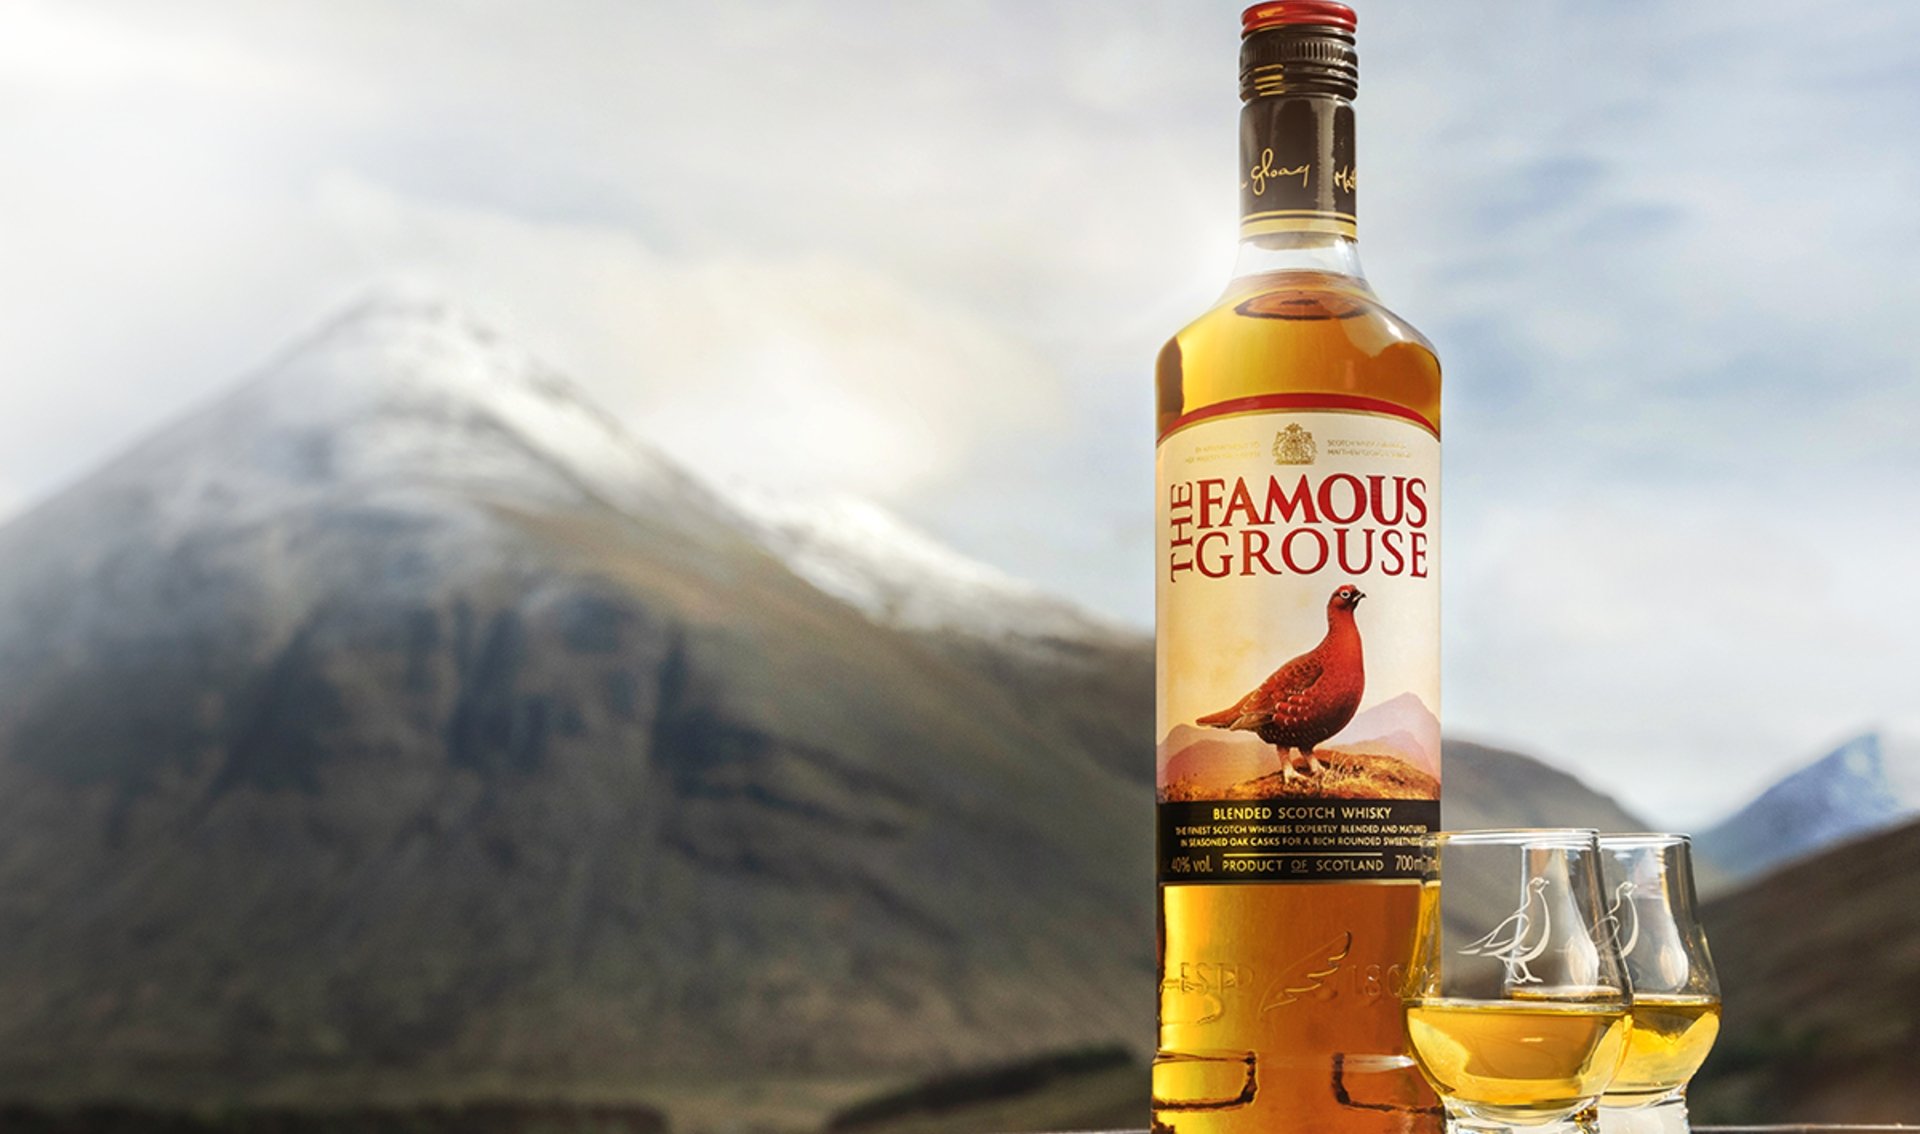 The Famous Grouse has now celebrated 40 years as Scotland's favourite Scotch Whisky 